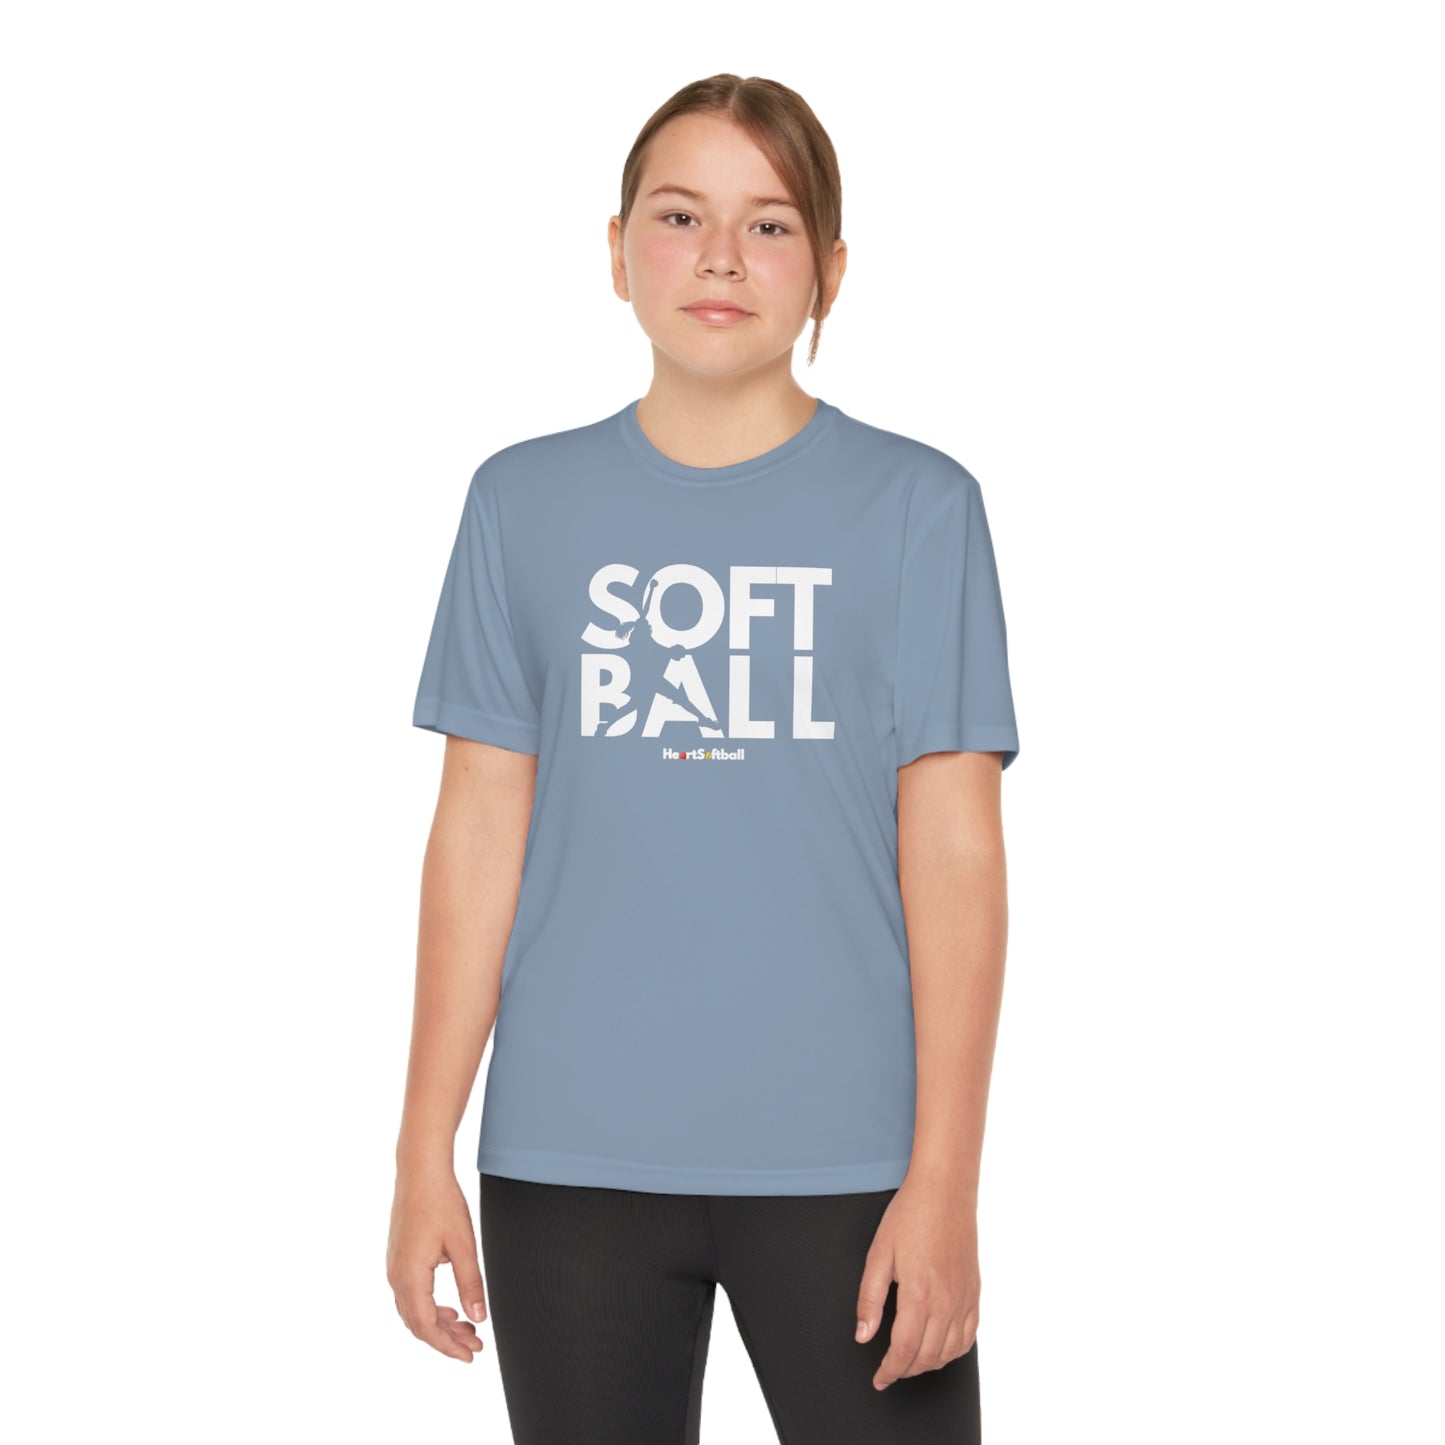 Softball Pitcher Youth Athletic Tee